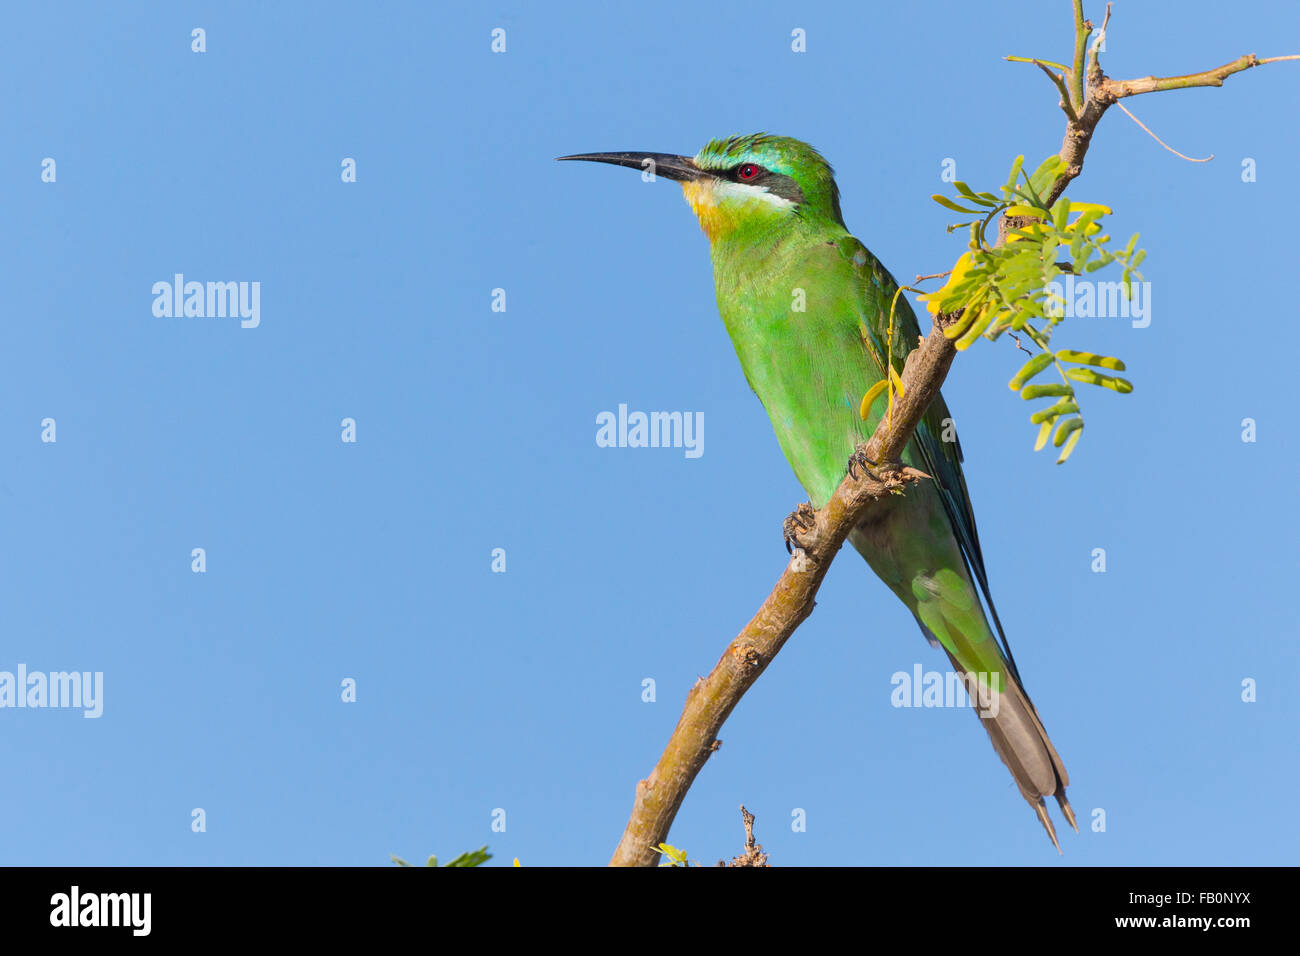 Blue-cheeked Bee-eater (Merops persicus), Perched on a branch, Salalah, Dhofar, Oman Stock Photo